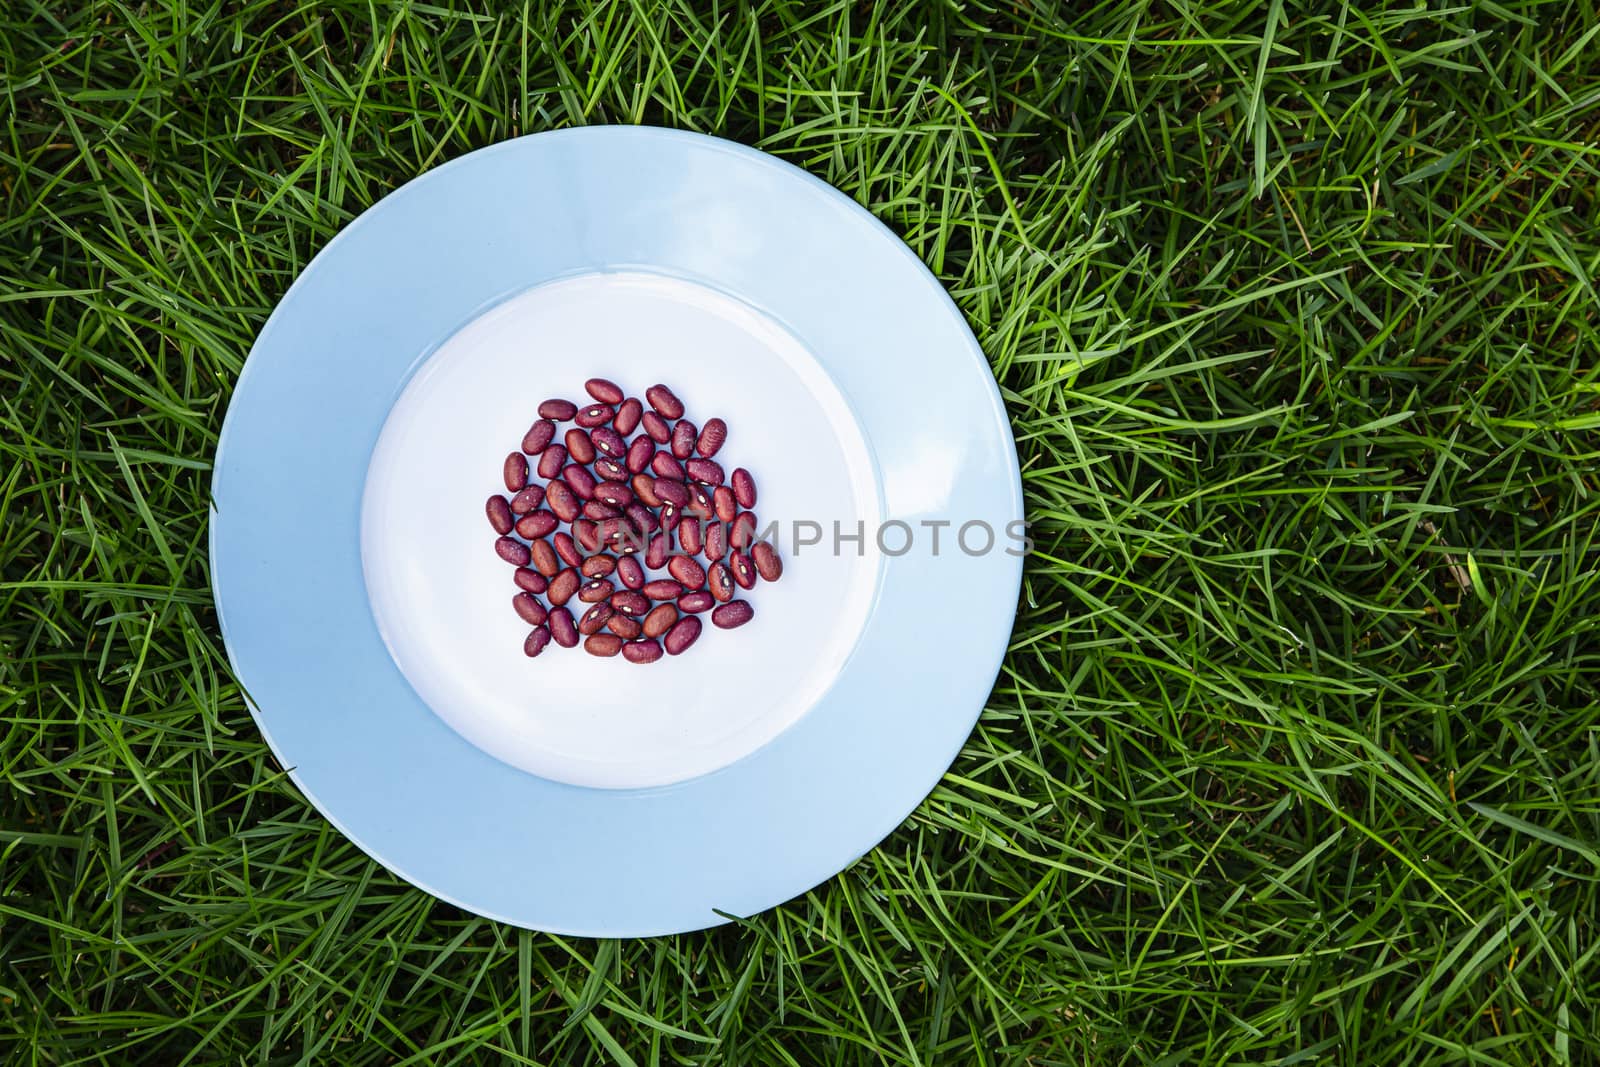 Plates of bean by mypstudio